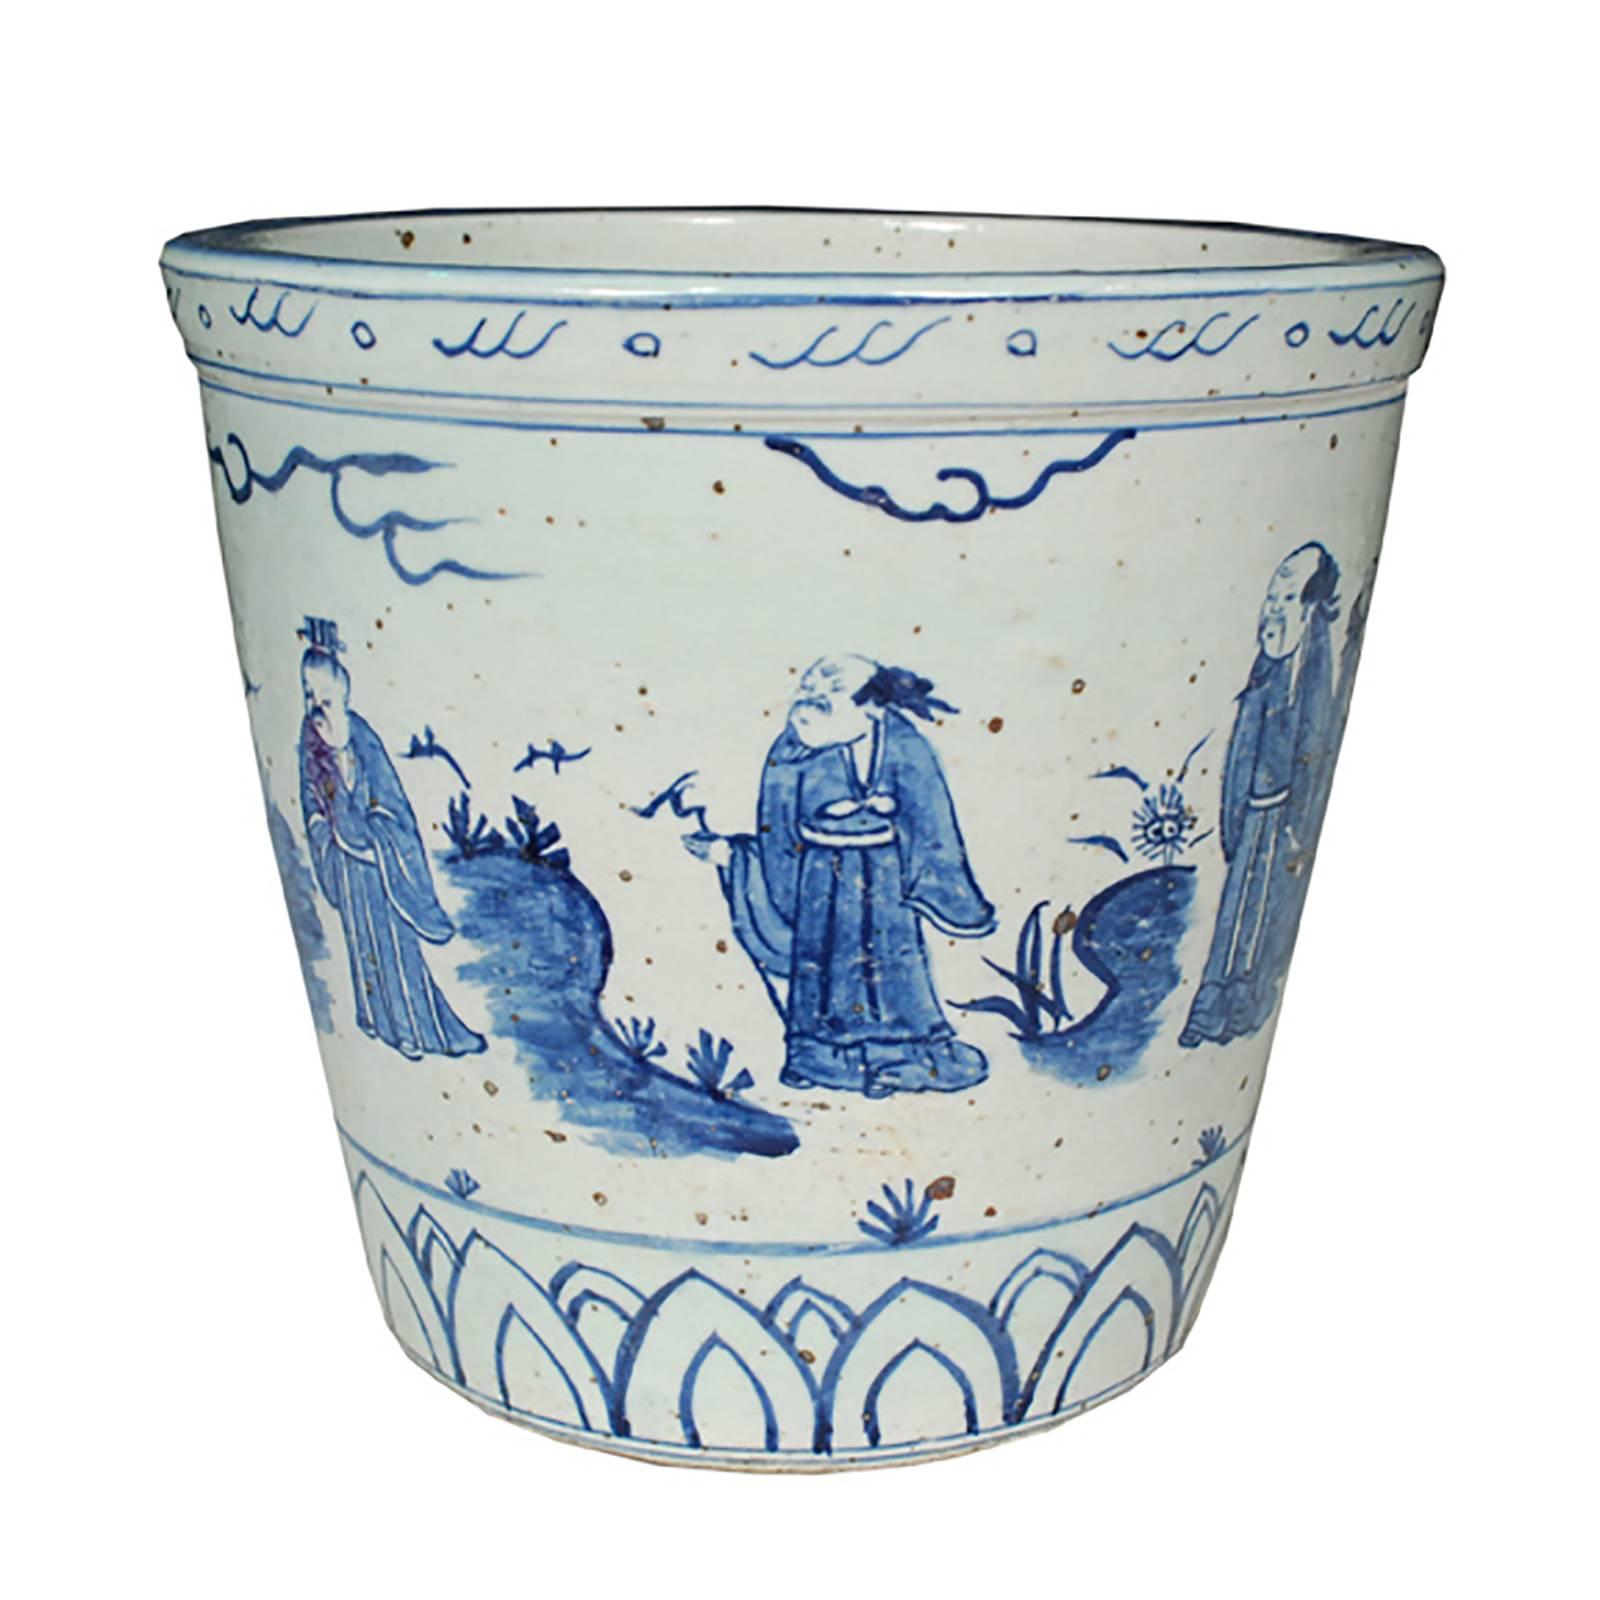 This unique pot was made by hand in southern China, and is a wonderful example of blue and white ceramics that are sought worldwide by collectors. The scene wraps around the entire pot and is painted in rich blue feathery brushstrokes. The figures